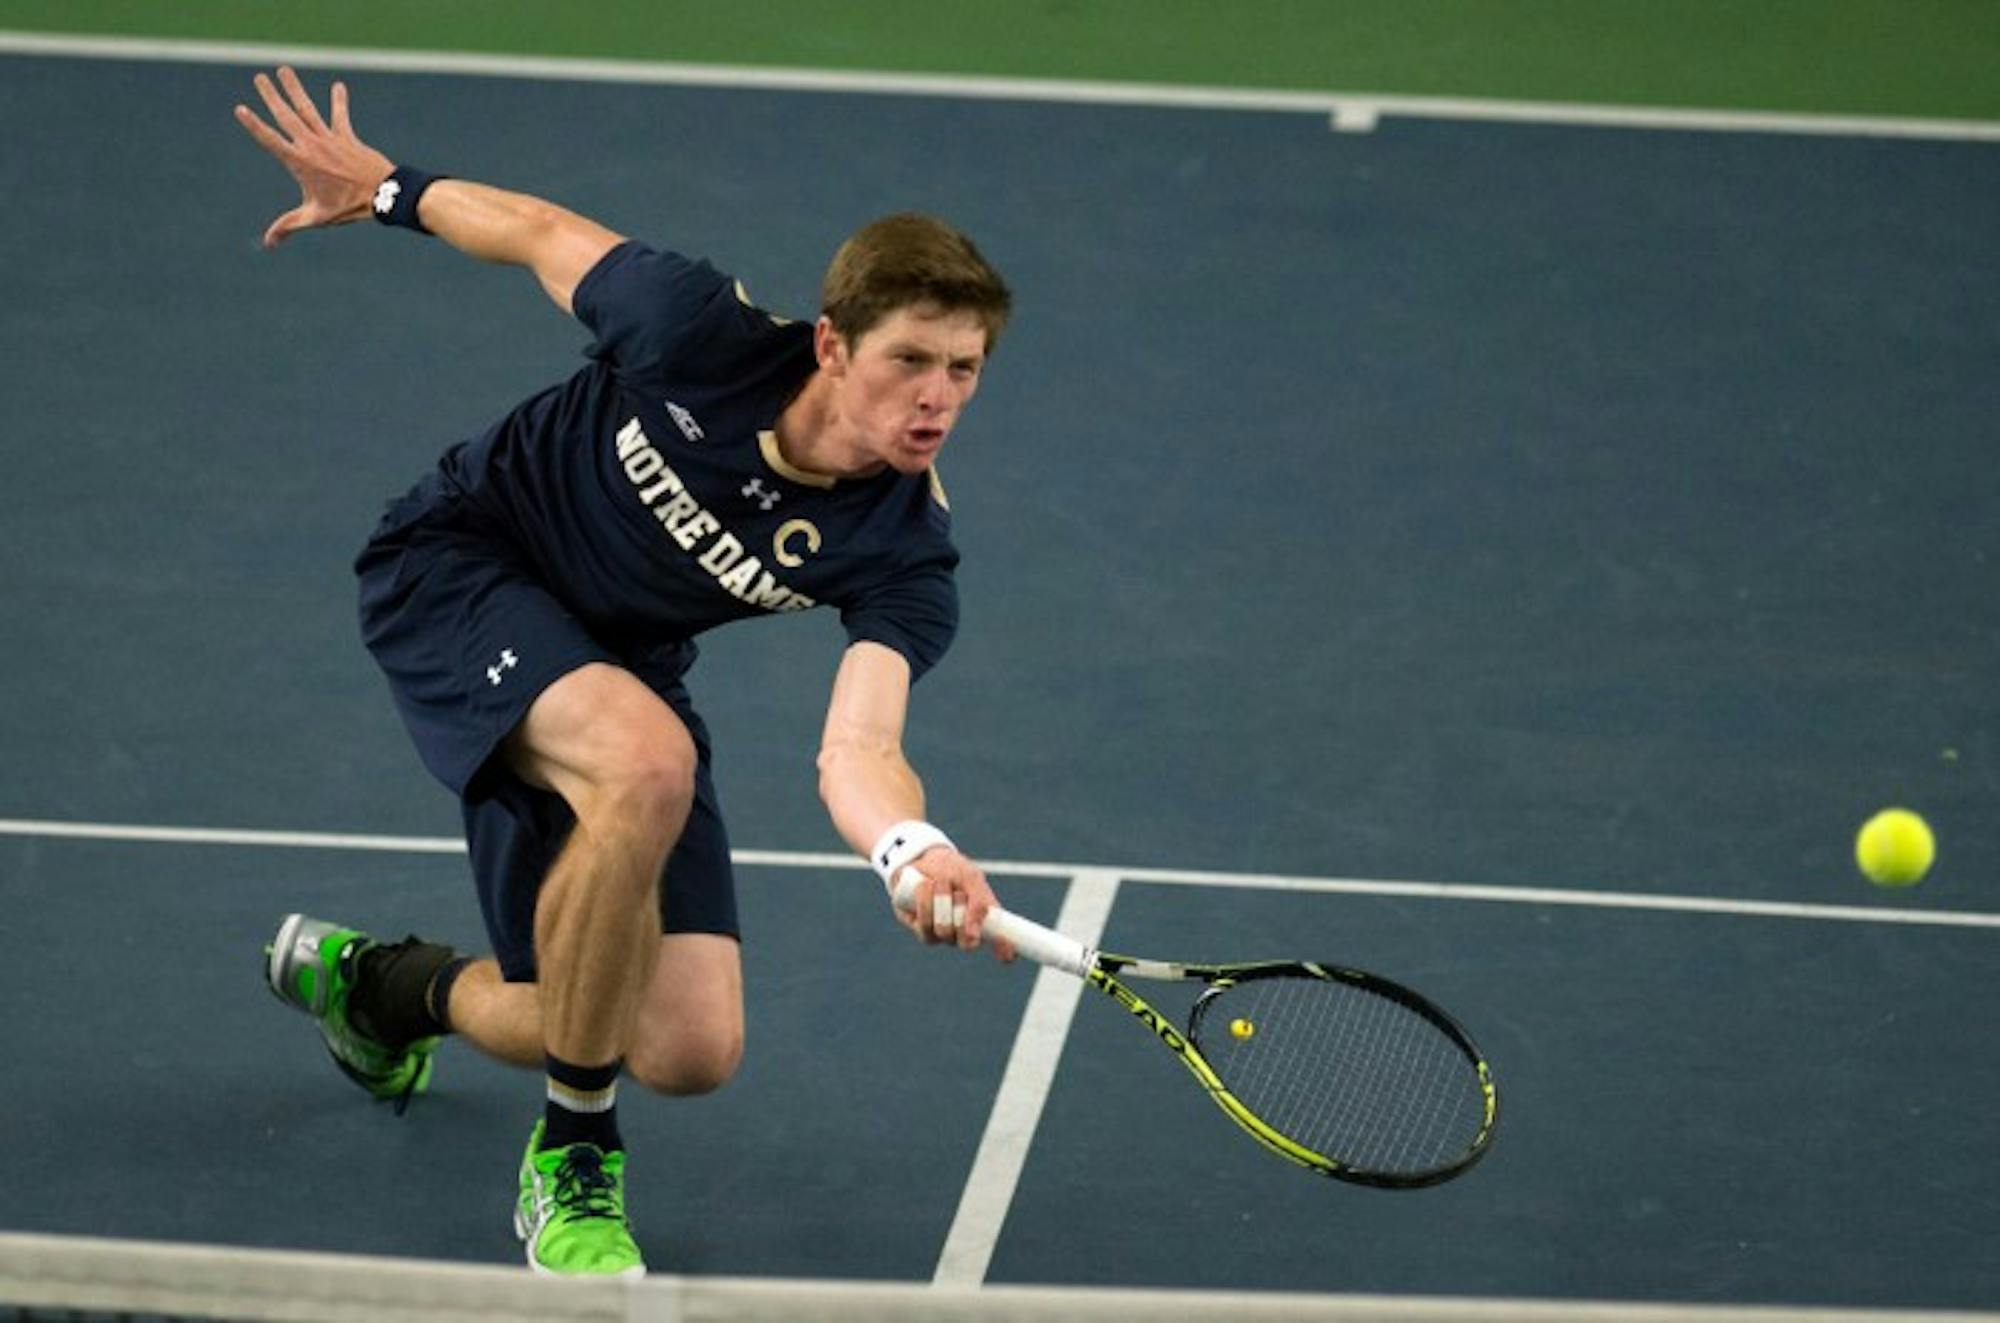 Junior Quentin Monaghan lunges for a shot during a 4-3 win against Oklahoma State at Eck Tennis Pavilion on Jan. 24.